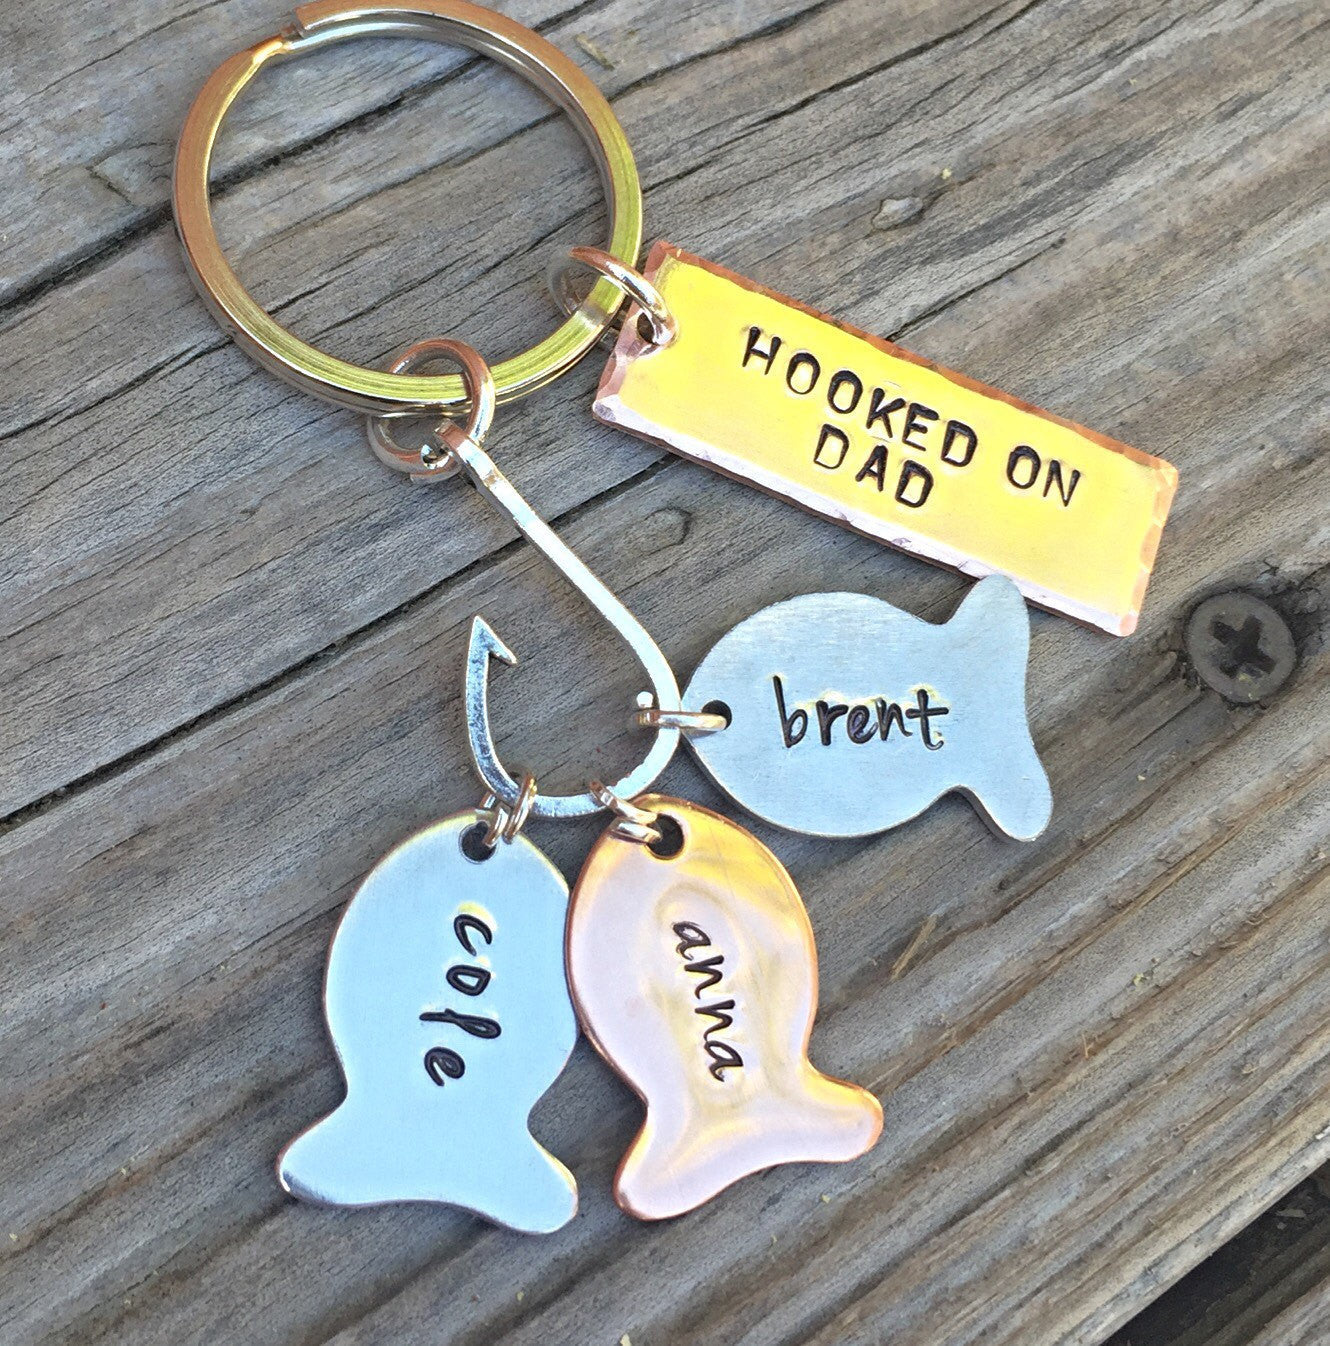 Hooked On Dad Fishing Keychain - Natashaaloha, jewelry, bracelets, necklace, keychains, fishing lures, gifts for men, charms, personalized, 